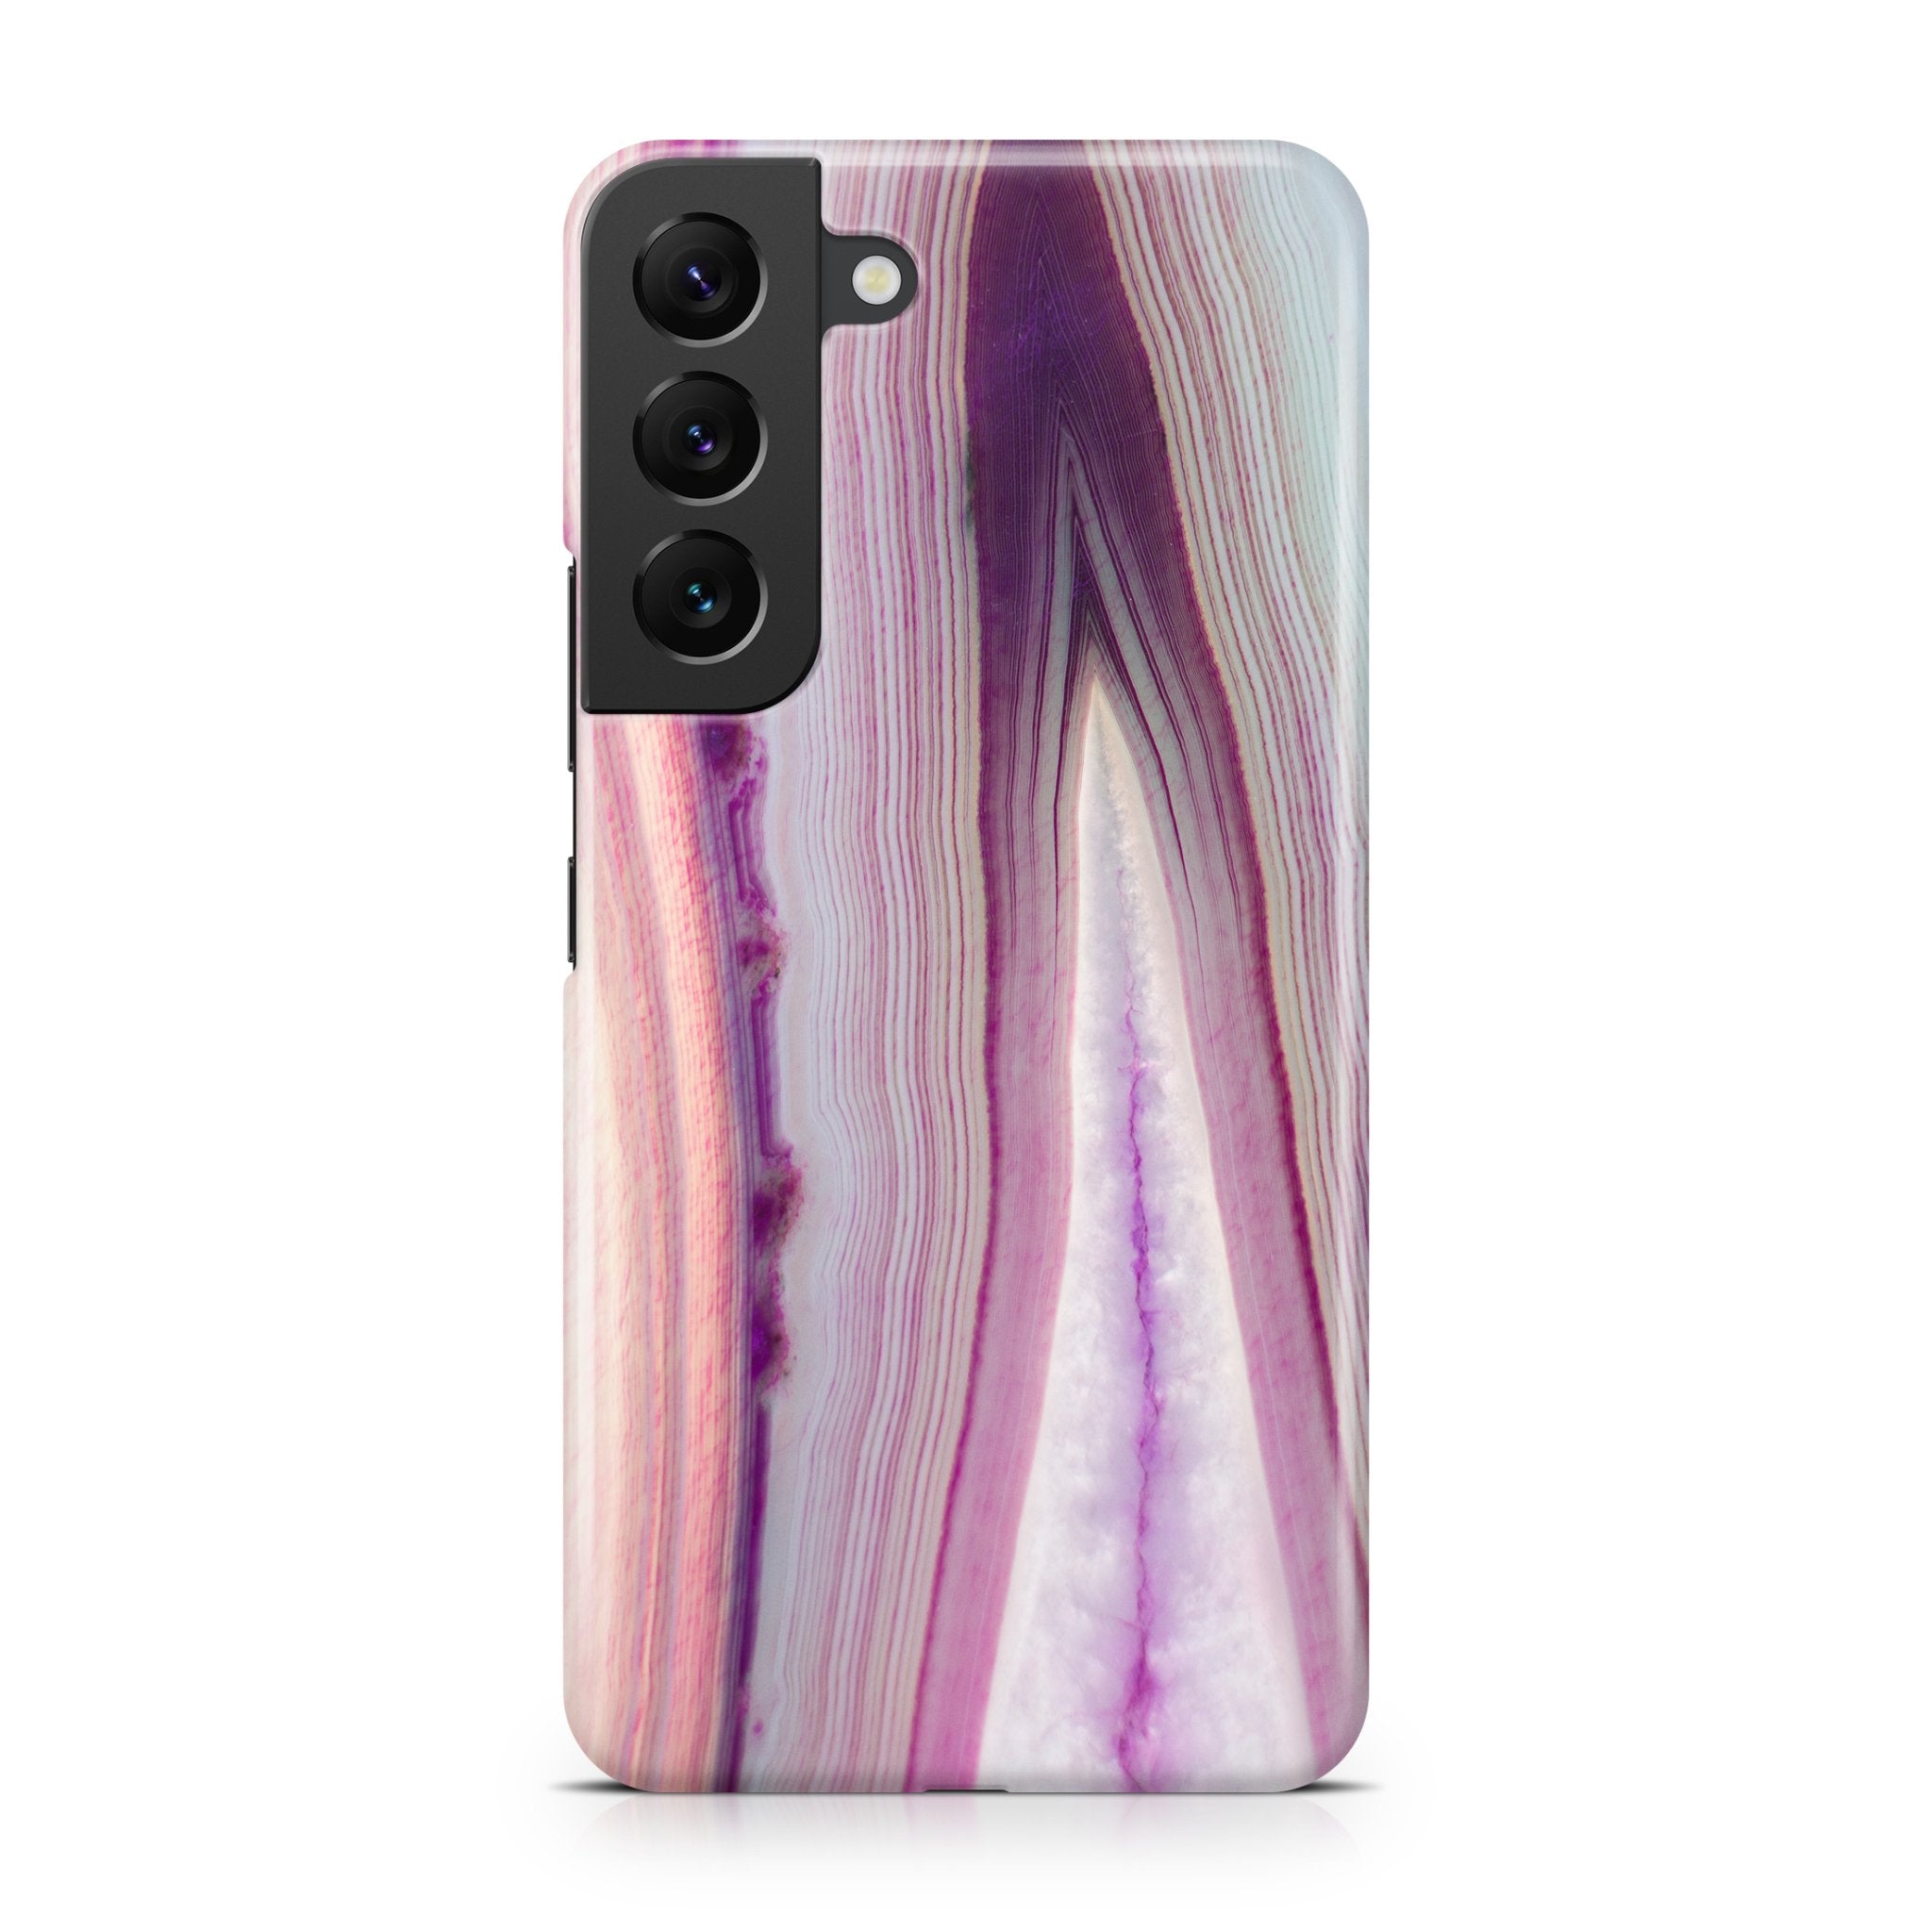 Grape Agate - Samsung phone case designs by CaseSwagger